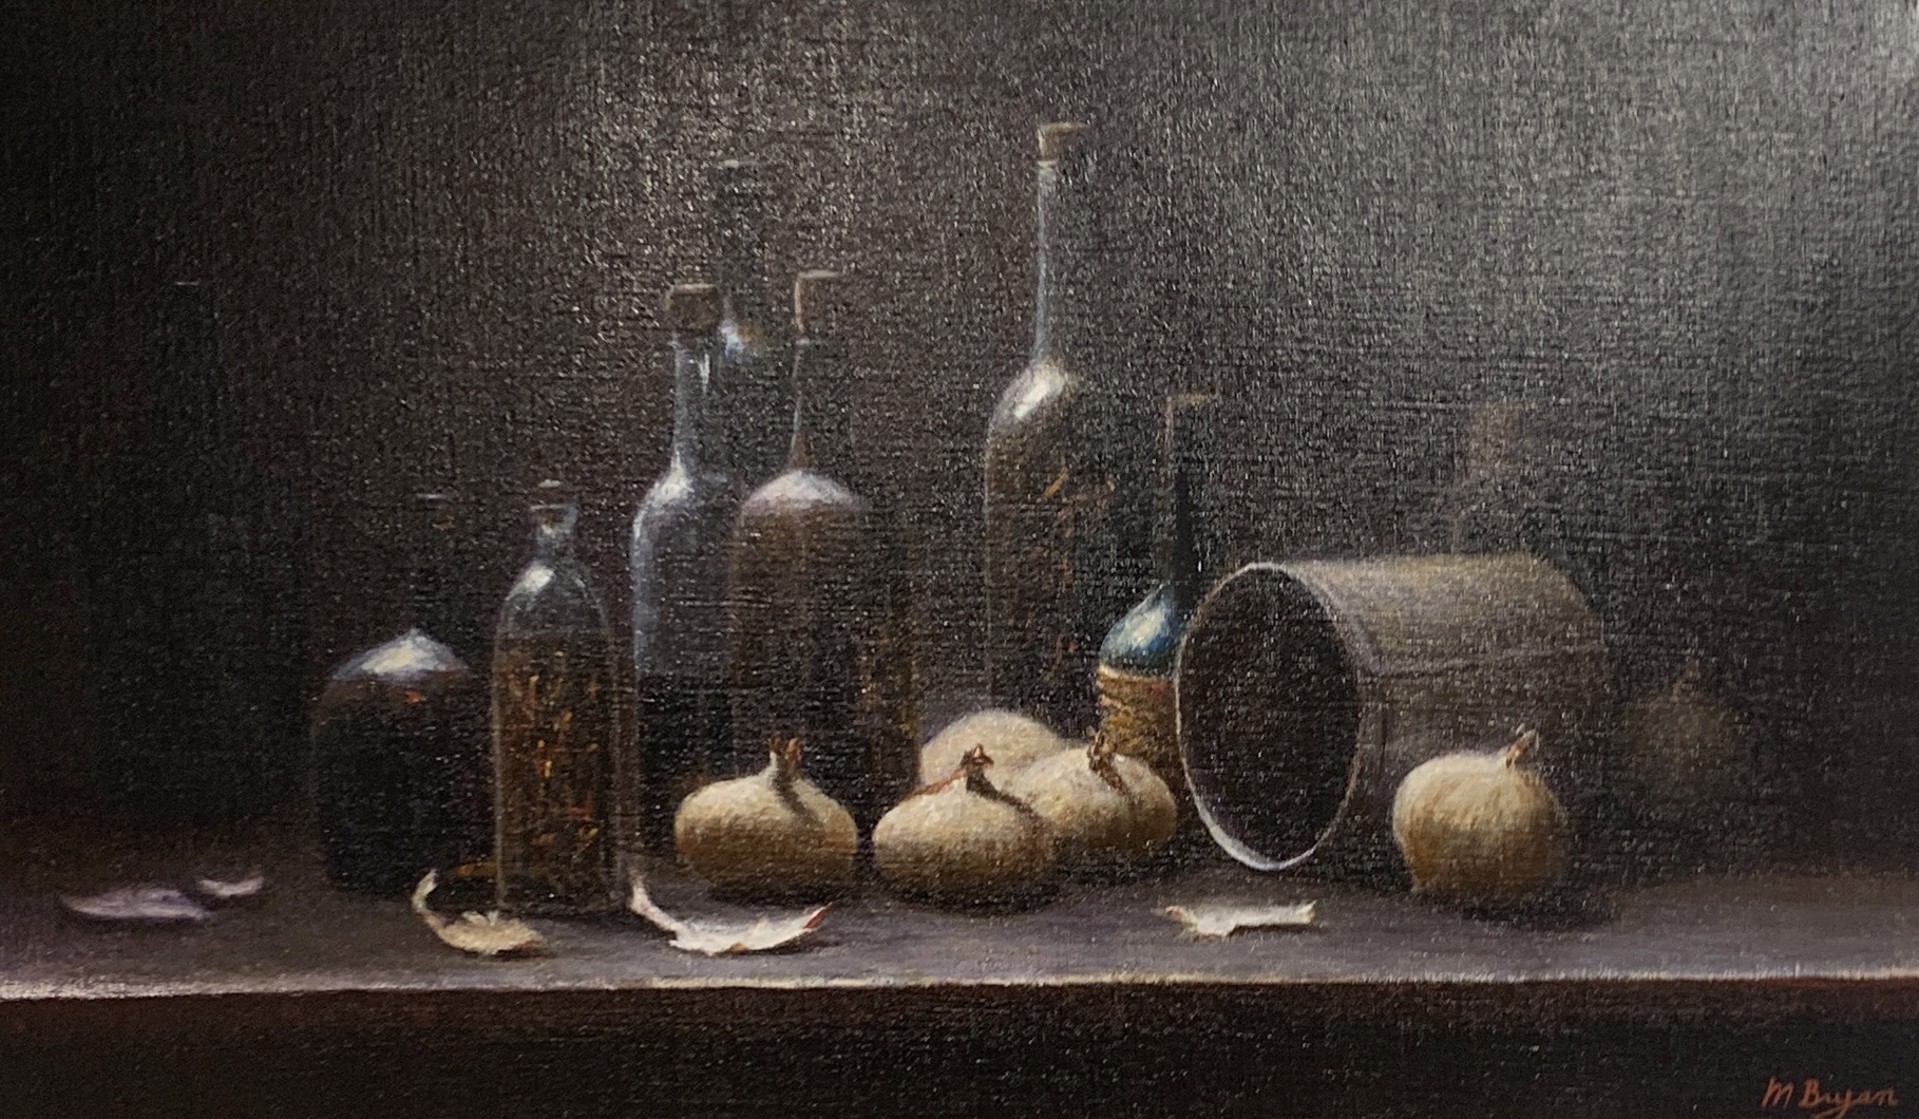 Onions & Bottles by Malcolm Bryan